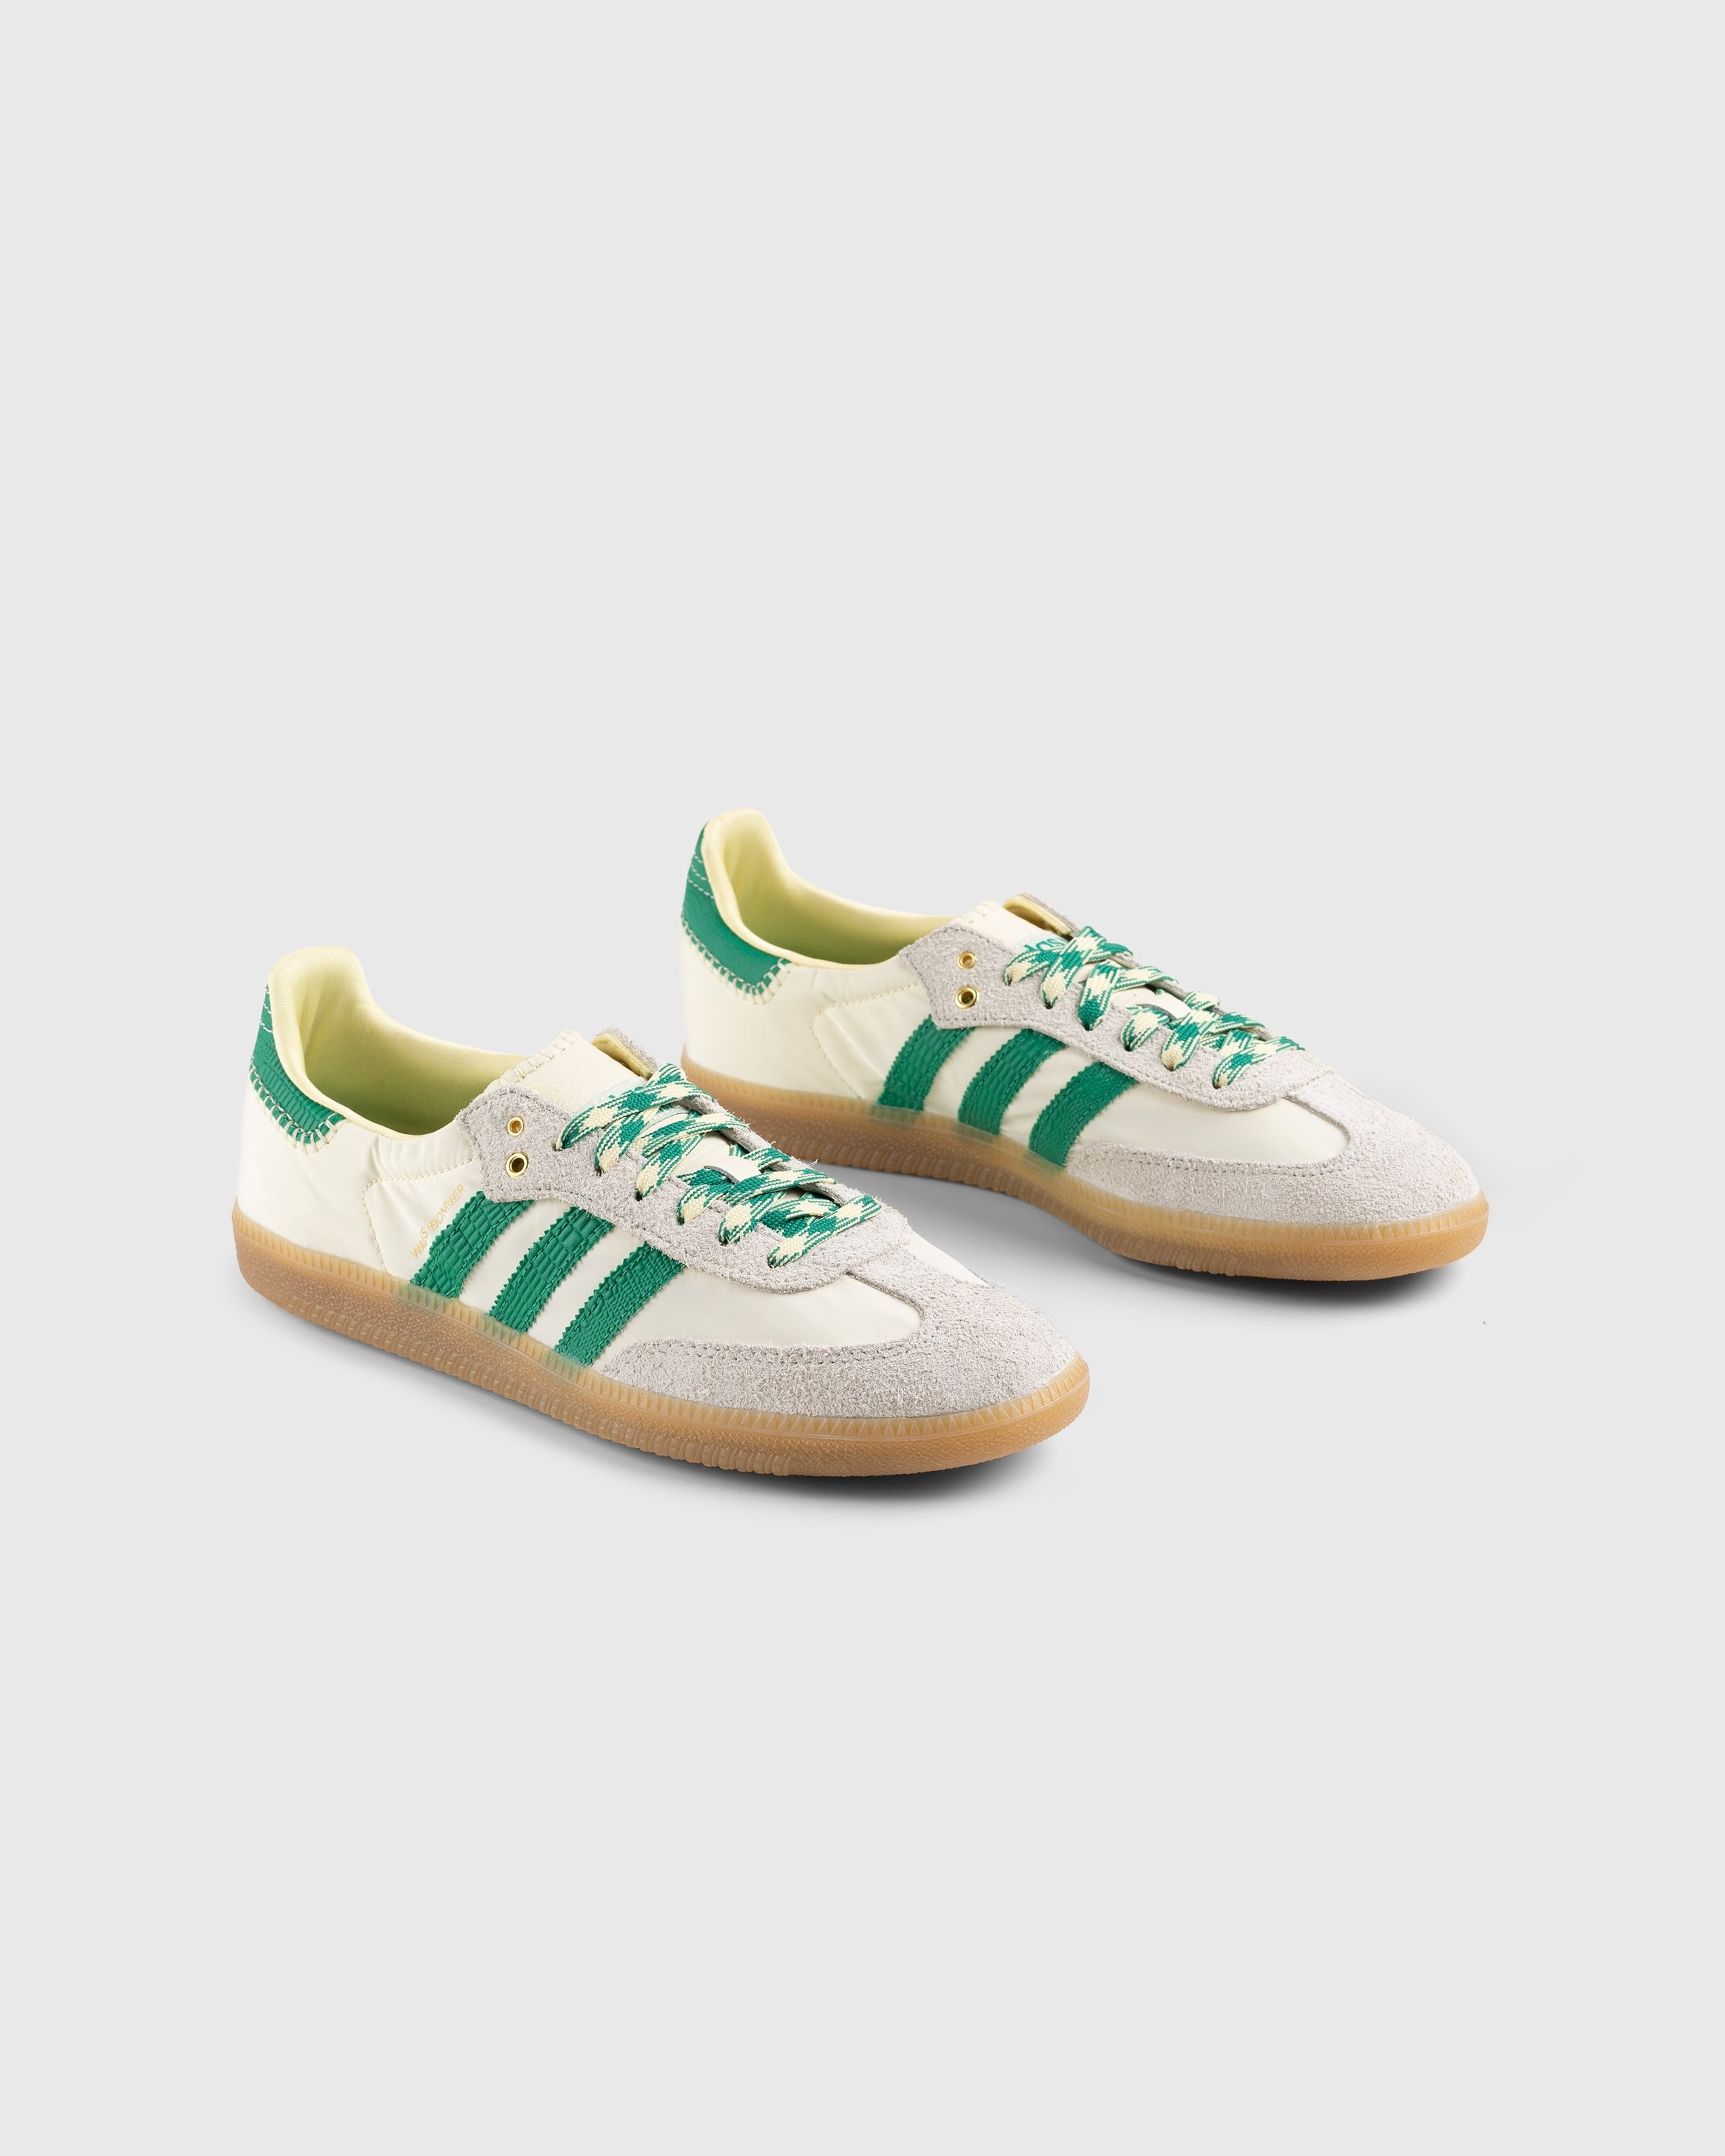 Adidas x Wales Bonner – WB Samba Cream White/Bold Green/Easy Yellow - Low Top Sneakers - Beige - Image 3